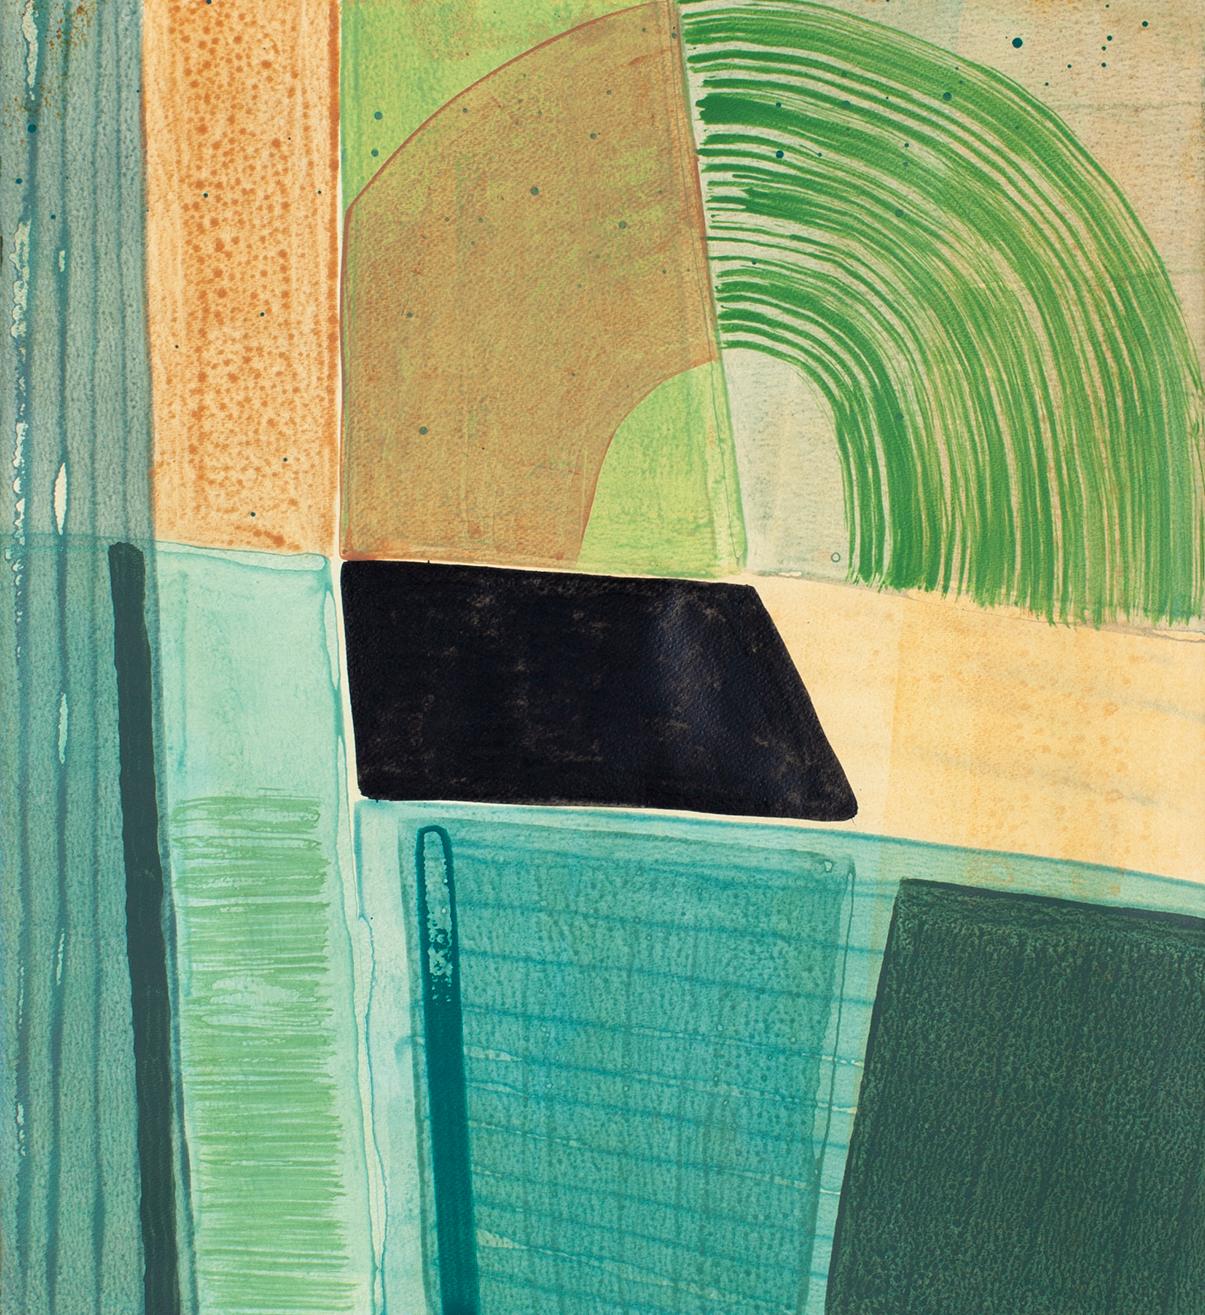 Ky Anderson
Segment 22.2, 2022
acrylic and ink on watercolor paper
25 x 22 in.
(and347)

This original acrylic and ink on paper painting by Ky Anderson features geometric shapes and abstract lines in bright shades of green, blue, orange, yellow, and